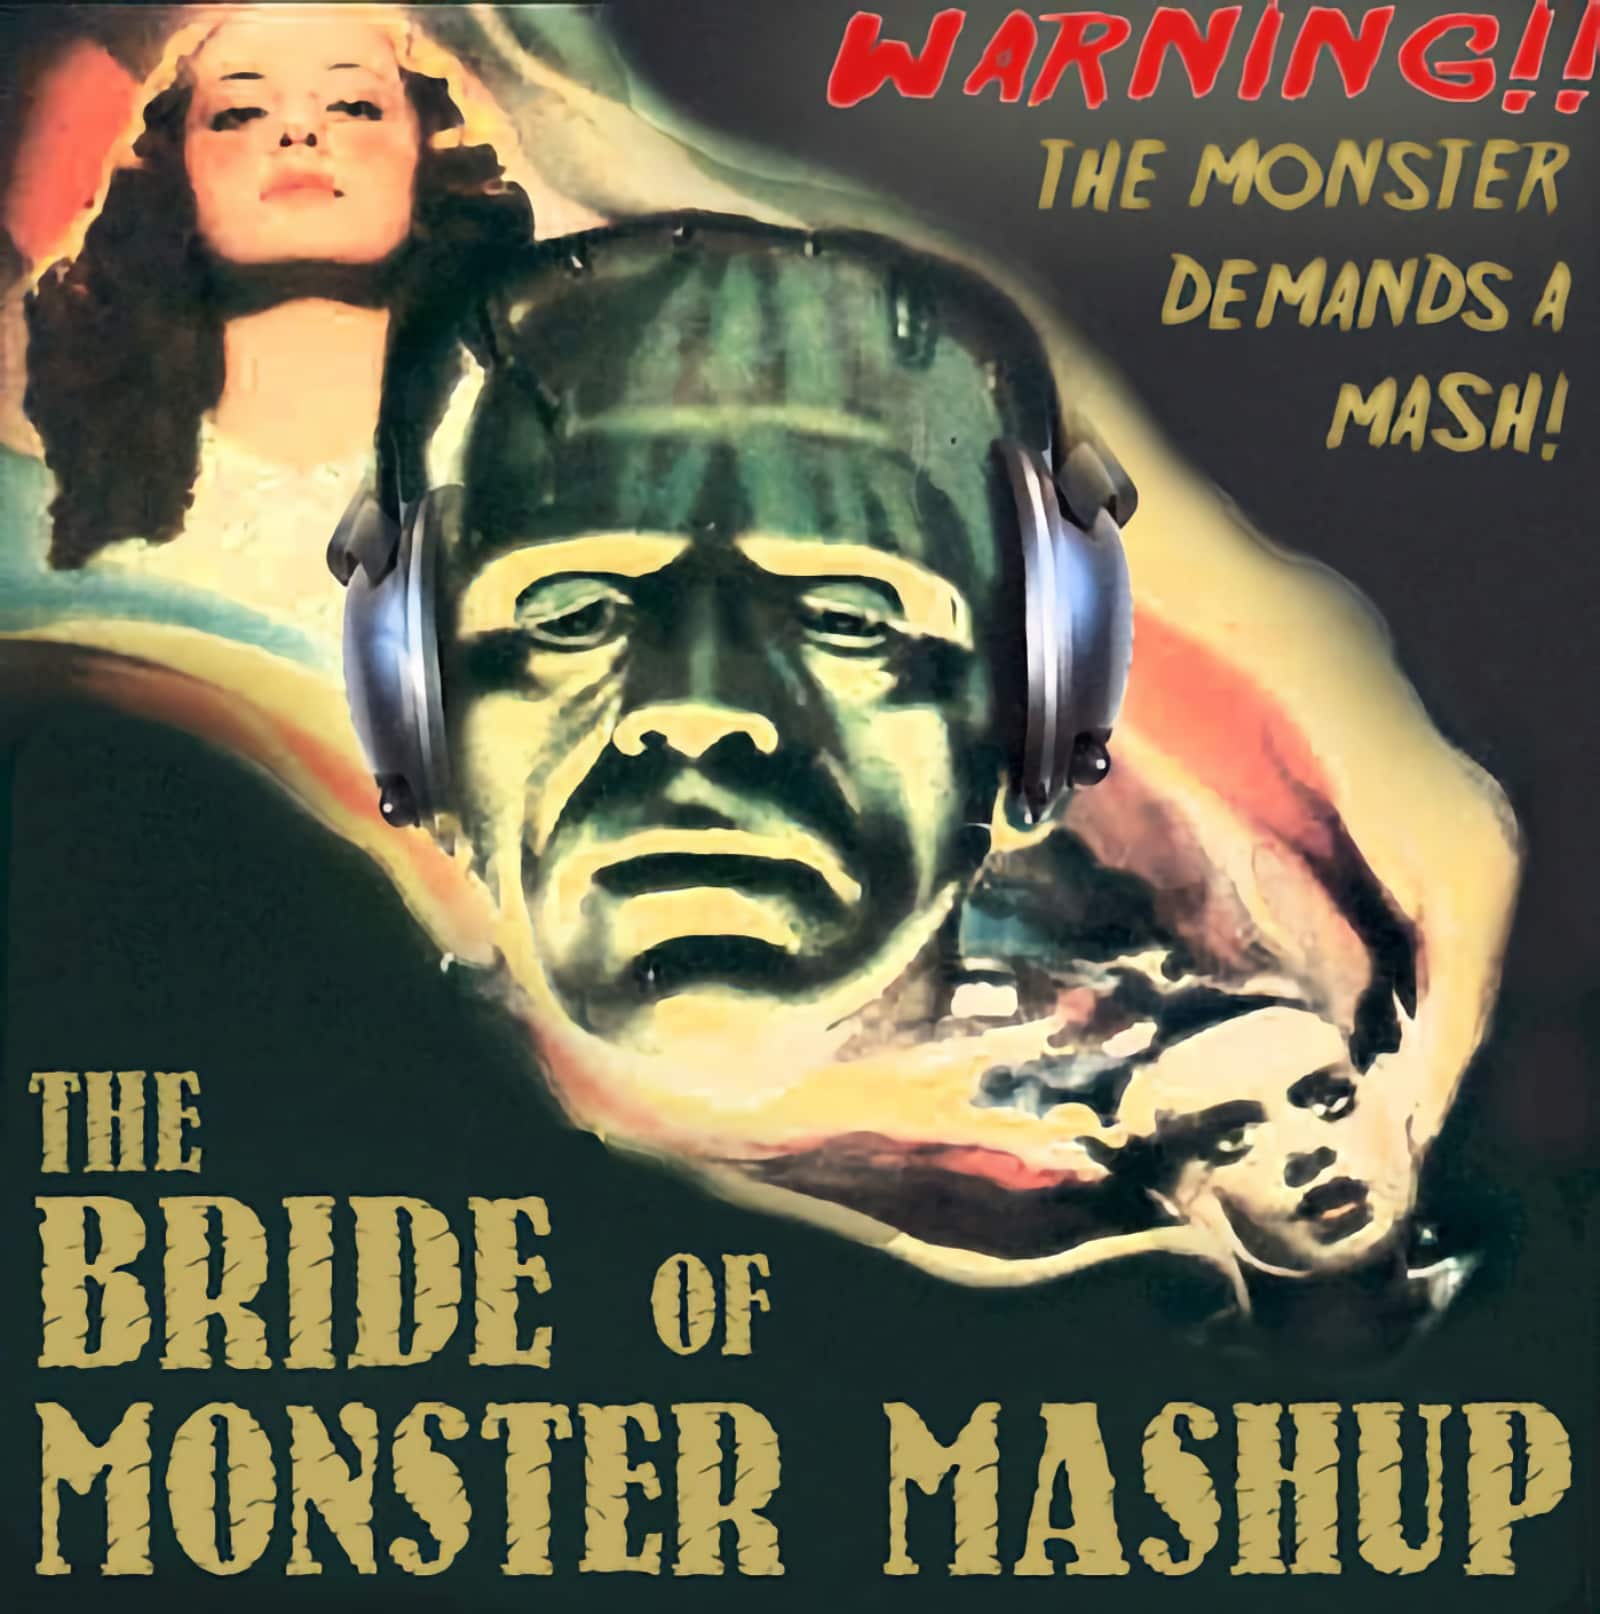 the bride of monster mashup halloween frankenstein - Radio Clash Podcast Bride of Monster Mash album inc new DJNoNo track! Radio Clash Music Mashup Podcast brings you the best in eclectic tunes, mashups and remixes from around the world. Since 2004, we've been bringing you the freshest and most innovative music from a diverse range of genres and cultures. Join us on our musical journey as we explore the sounds of yesterday, today, and tomorrow. Discover new music and be inspired by the mashup of musical styles that only Radio Clash can provide. Subscribe now to elevate your musical experience!